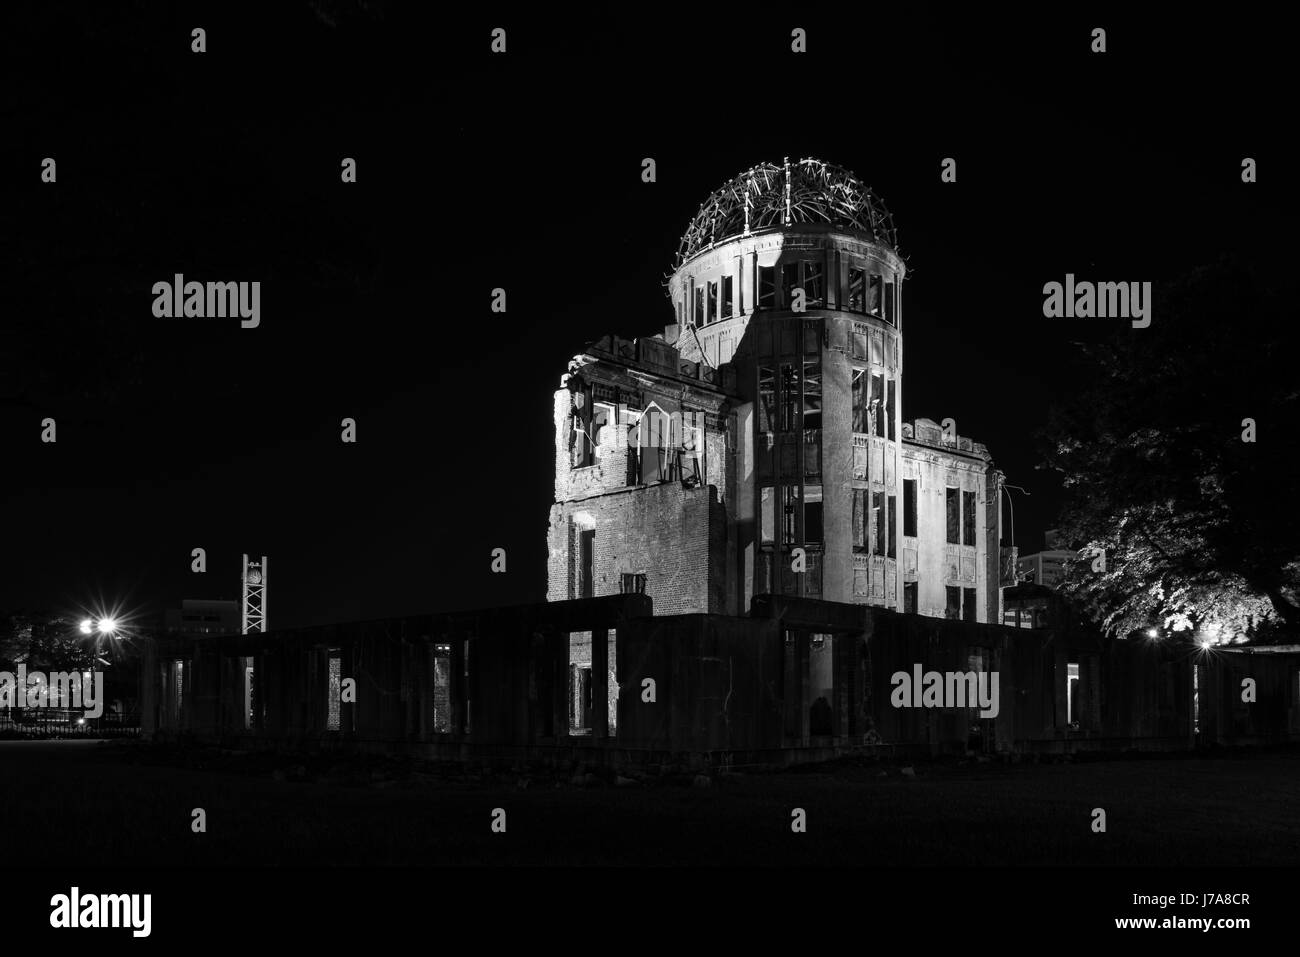 The A-Dome,illuminated by artificial light, stands out in the darkness of the night.This black & white photo depicts the somber mood felt at the site. Stock Photo